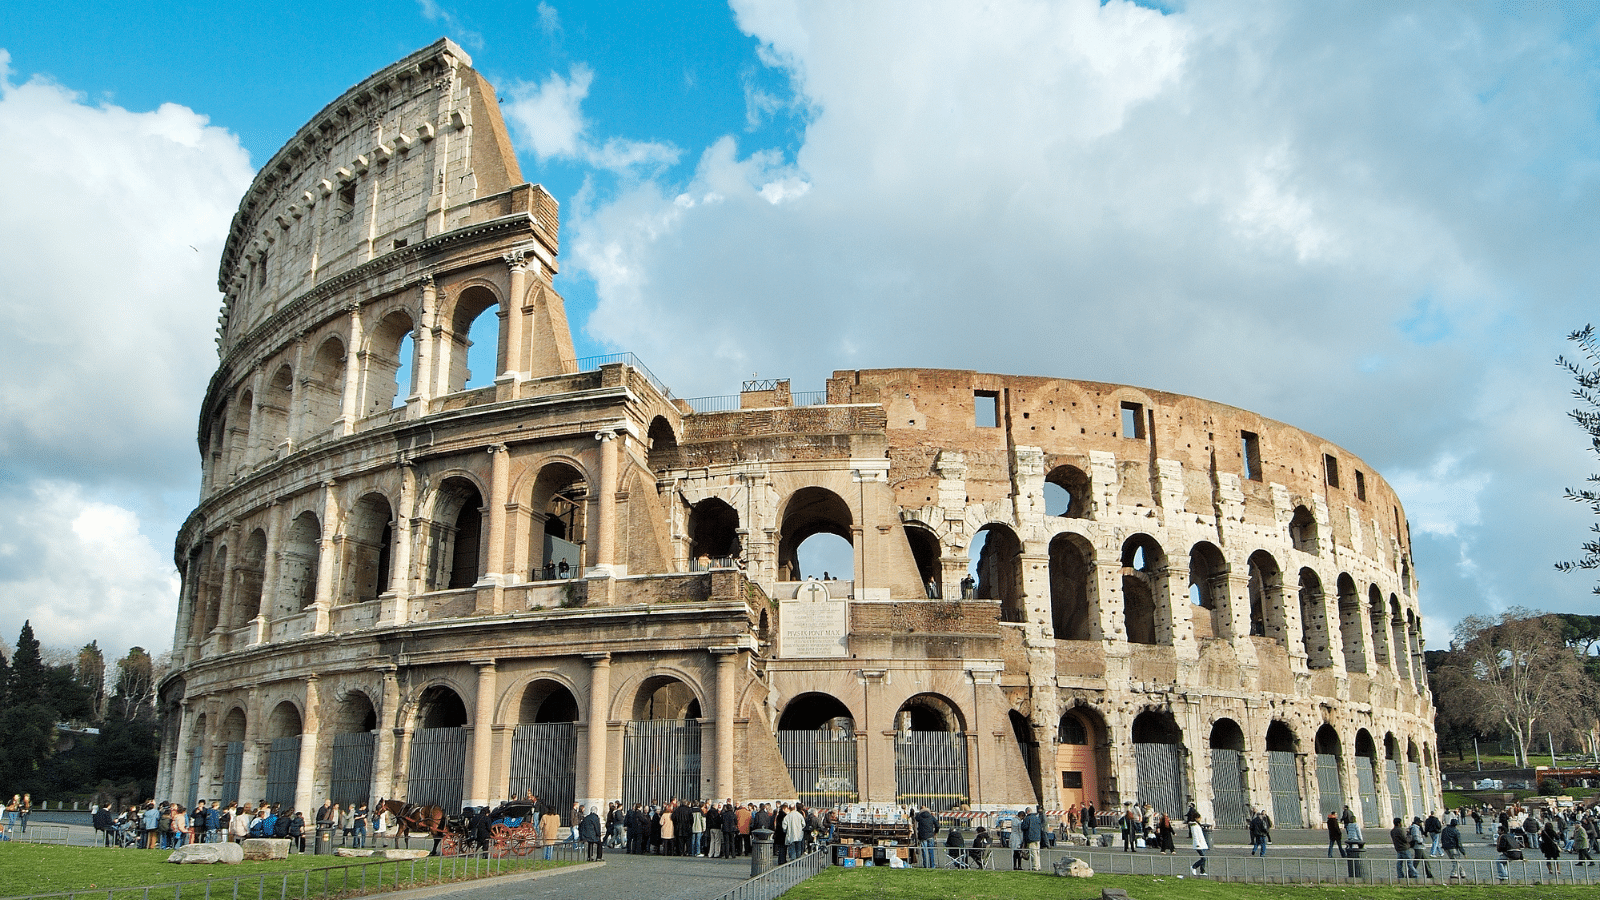 <p><span>The Colosseum in Rome is an amazing symbol of ancient Roman architecture and the vastness and grandeur of the ancient Roman Empire. The massive amphitheater, once the site of gladiatorial contests and games, is the most well-preserved amphitheater in the world. </span></p>